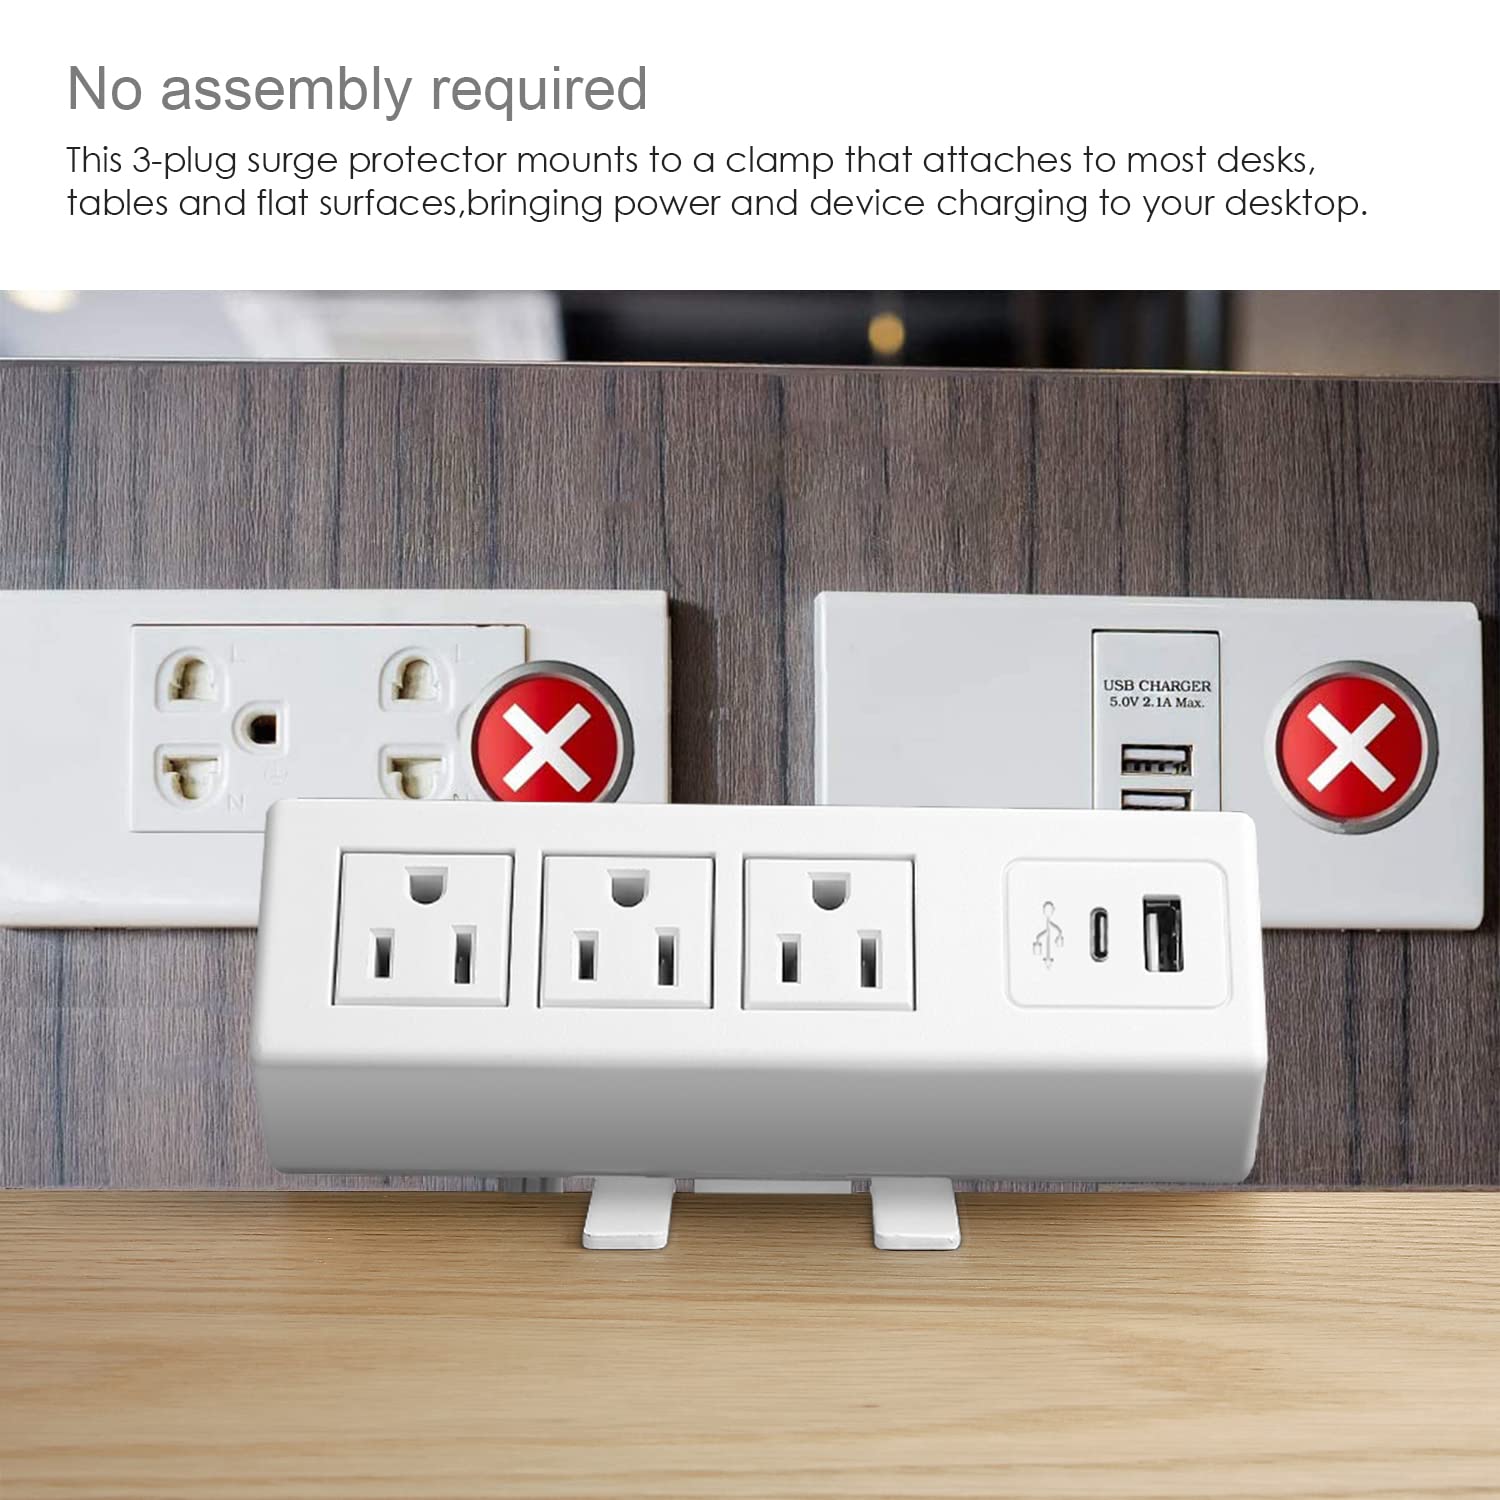 White Desktop Clamp Power Strip with USB, Surge Protector Power Charging Station Outlet with 3 Plugs 1 USB A 1 USB C PD Fast Charging Outlets, Desk Mount Multi-Outlets for Home Office Garage Workshop